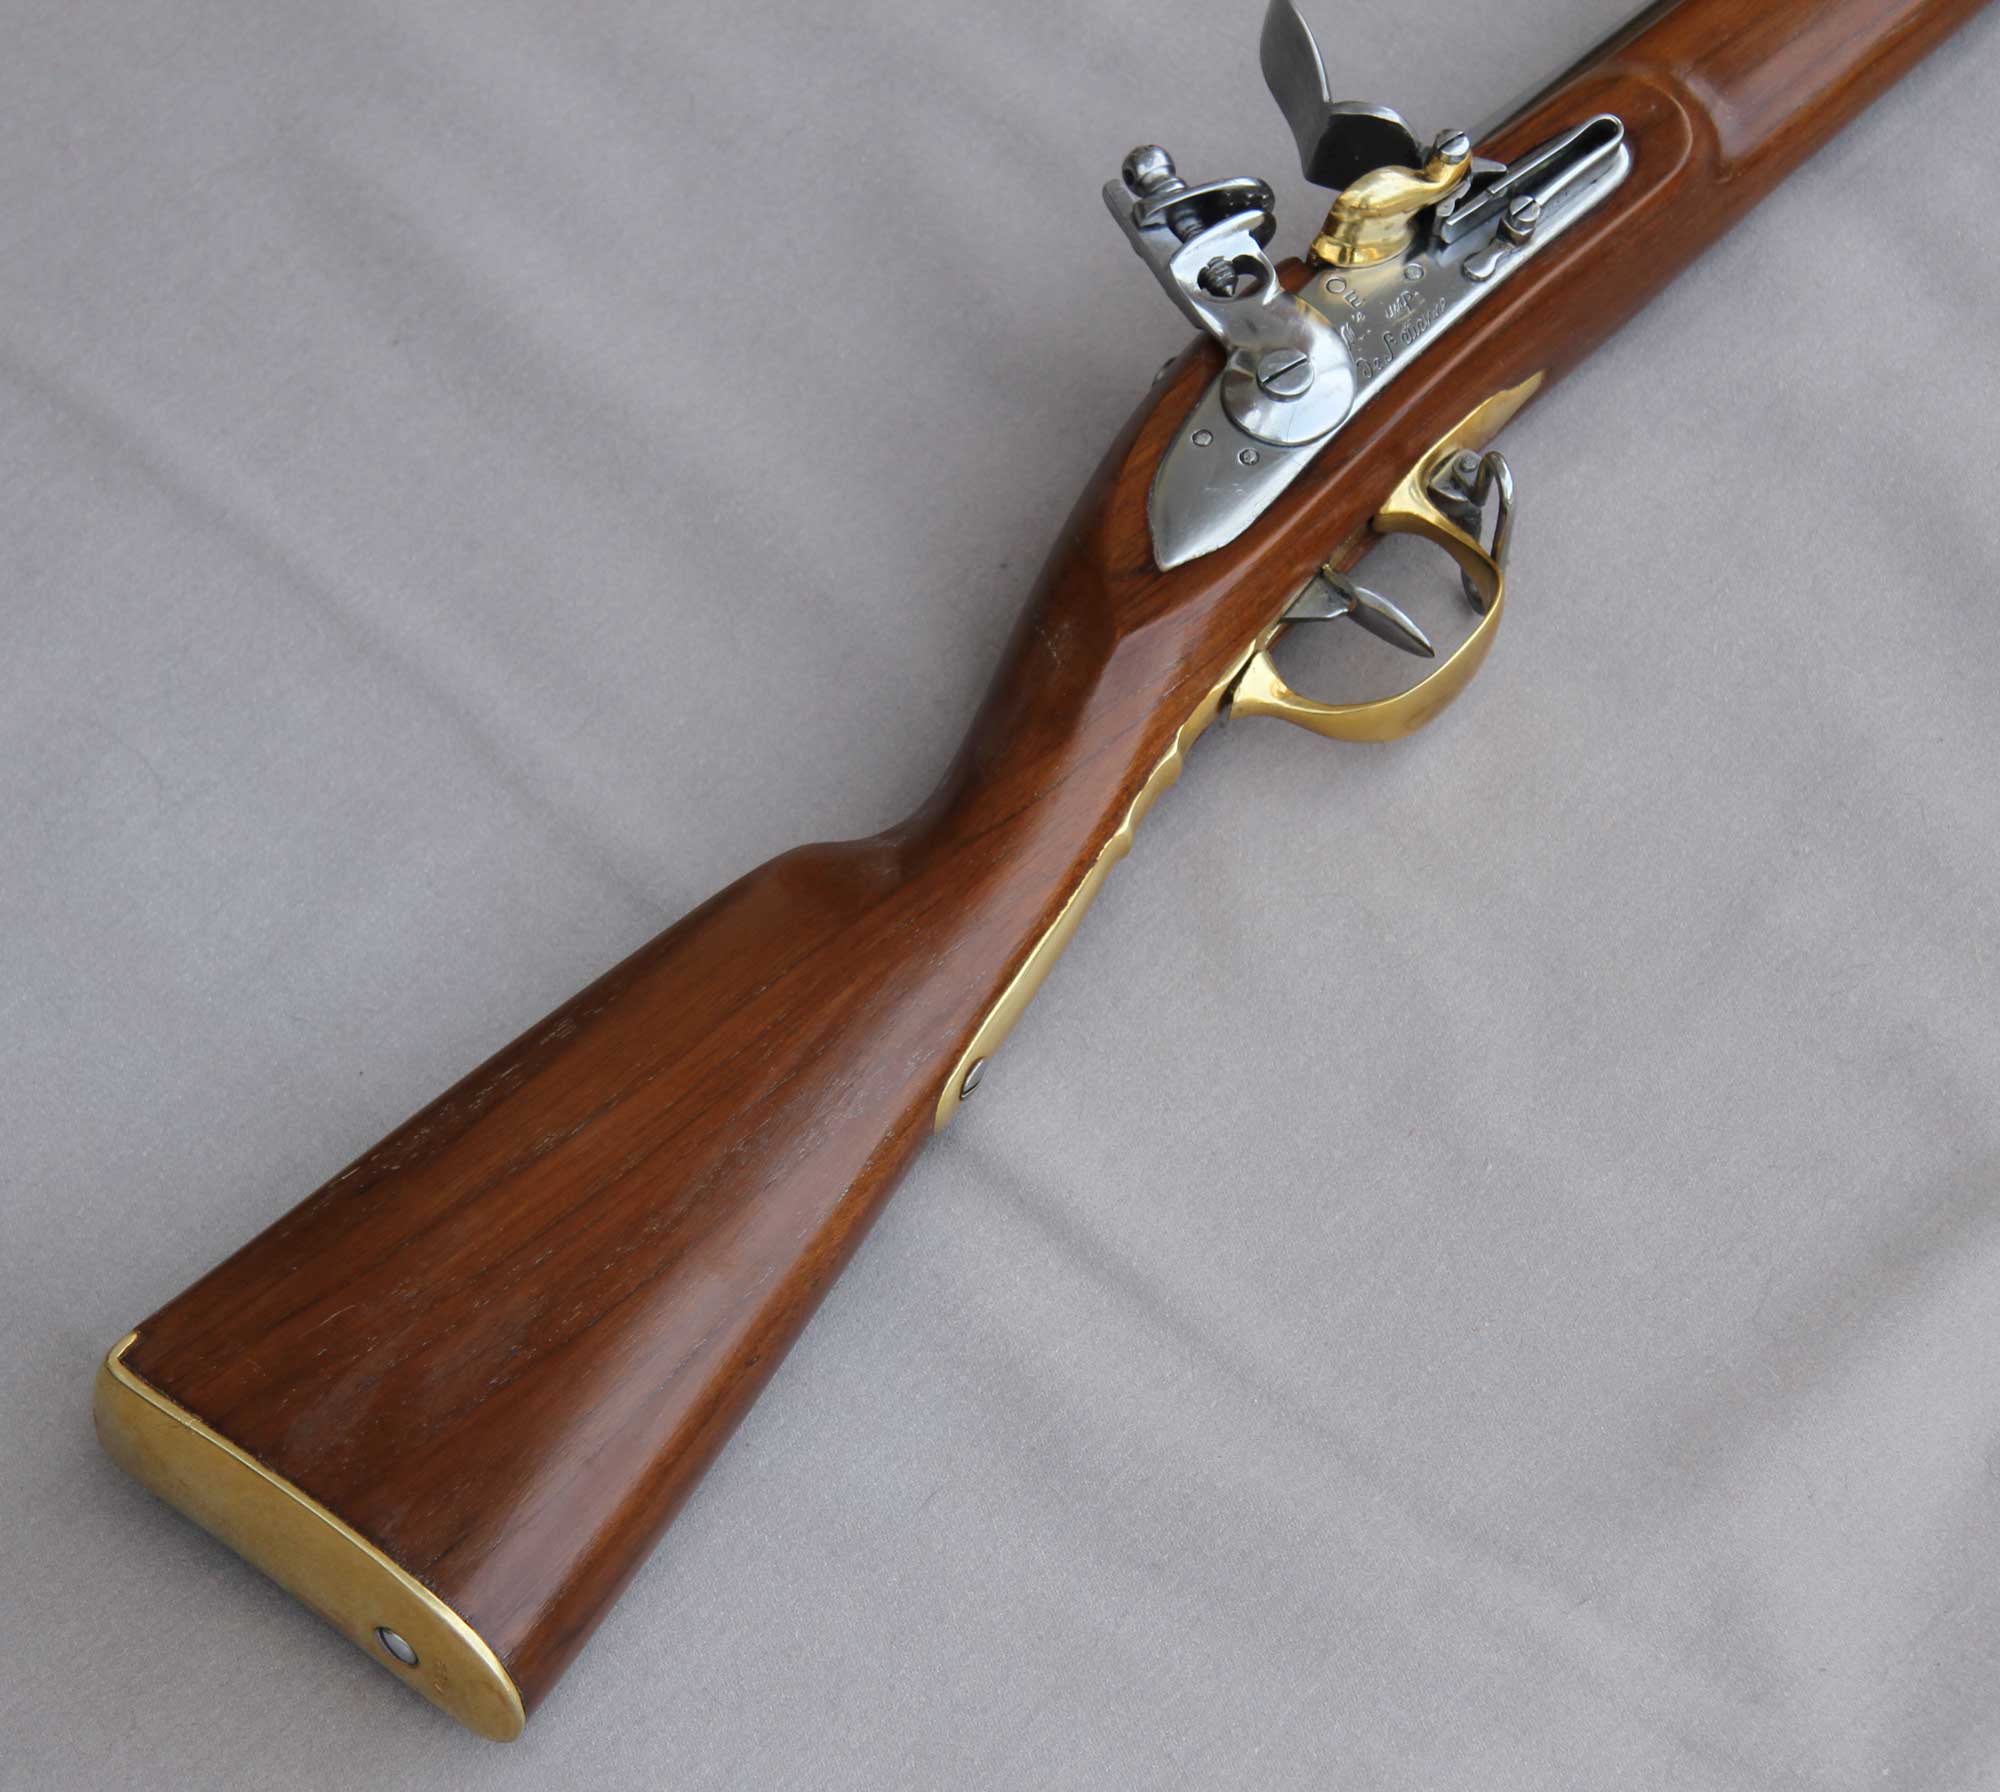 French 1777 Charleville musket (Garde Imperiale)